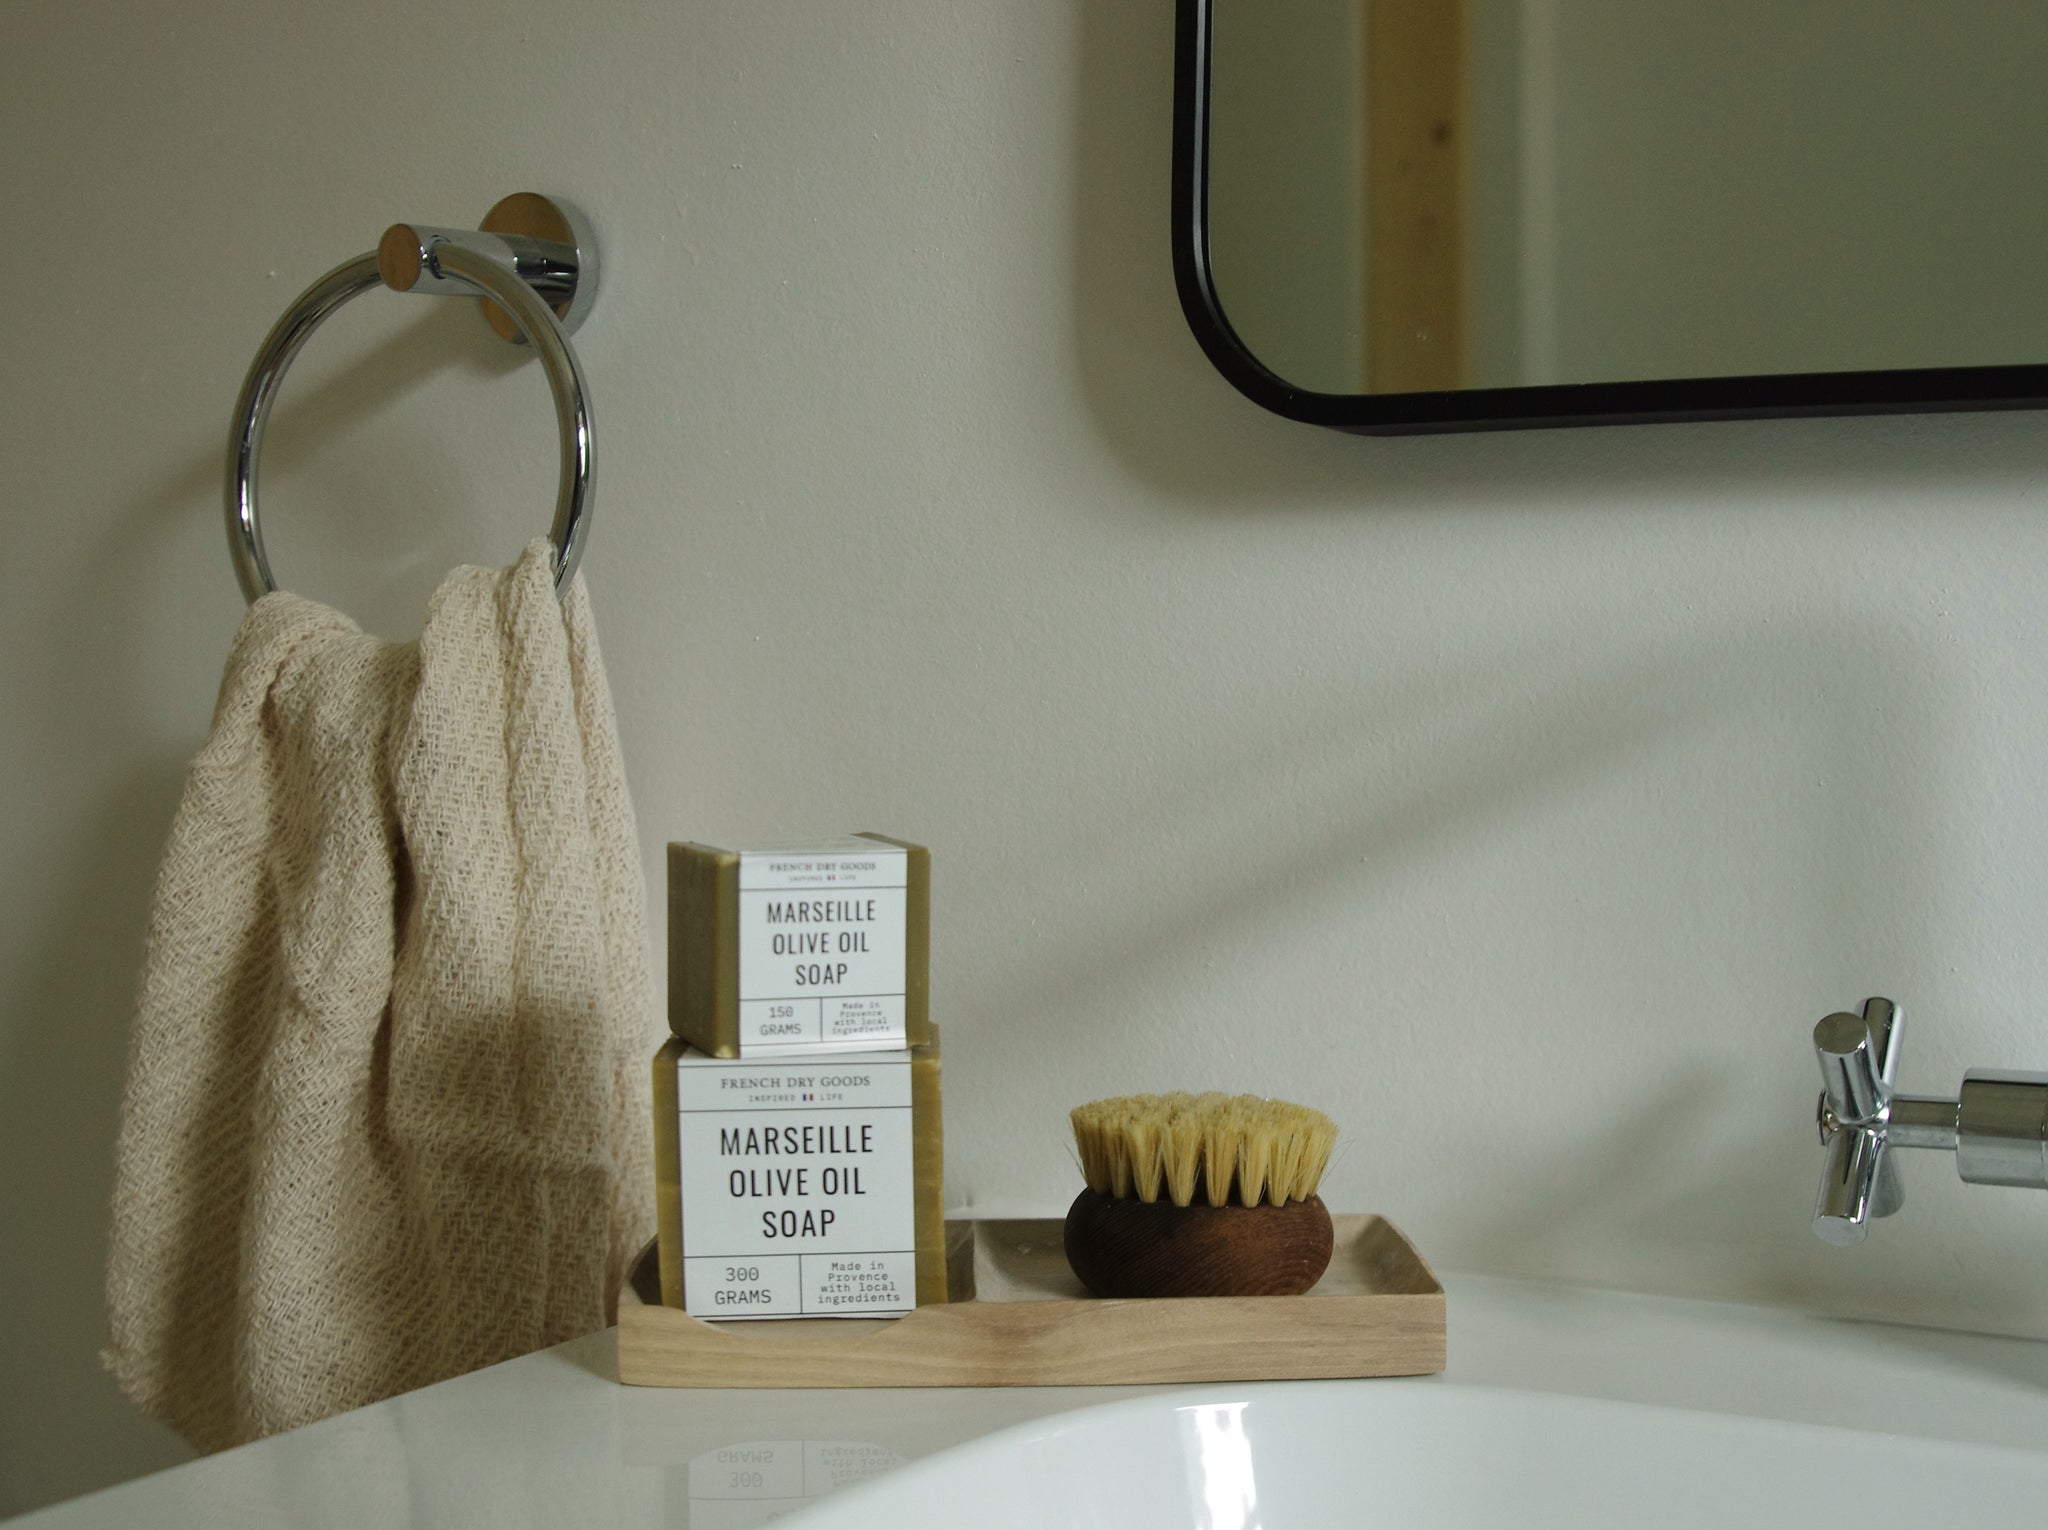 Wooden bathroom tray holding scrub brush and stack of two Marseille soap cubes.